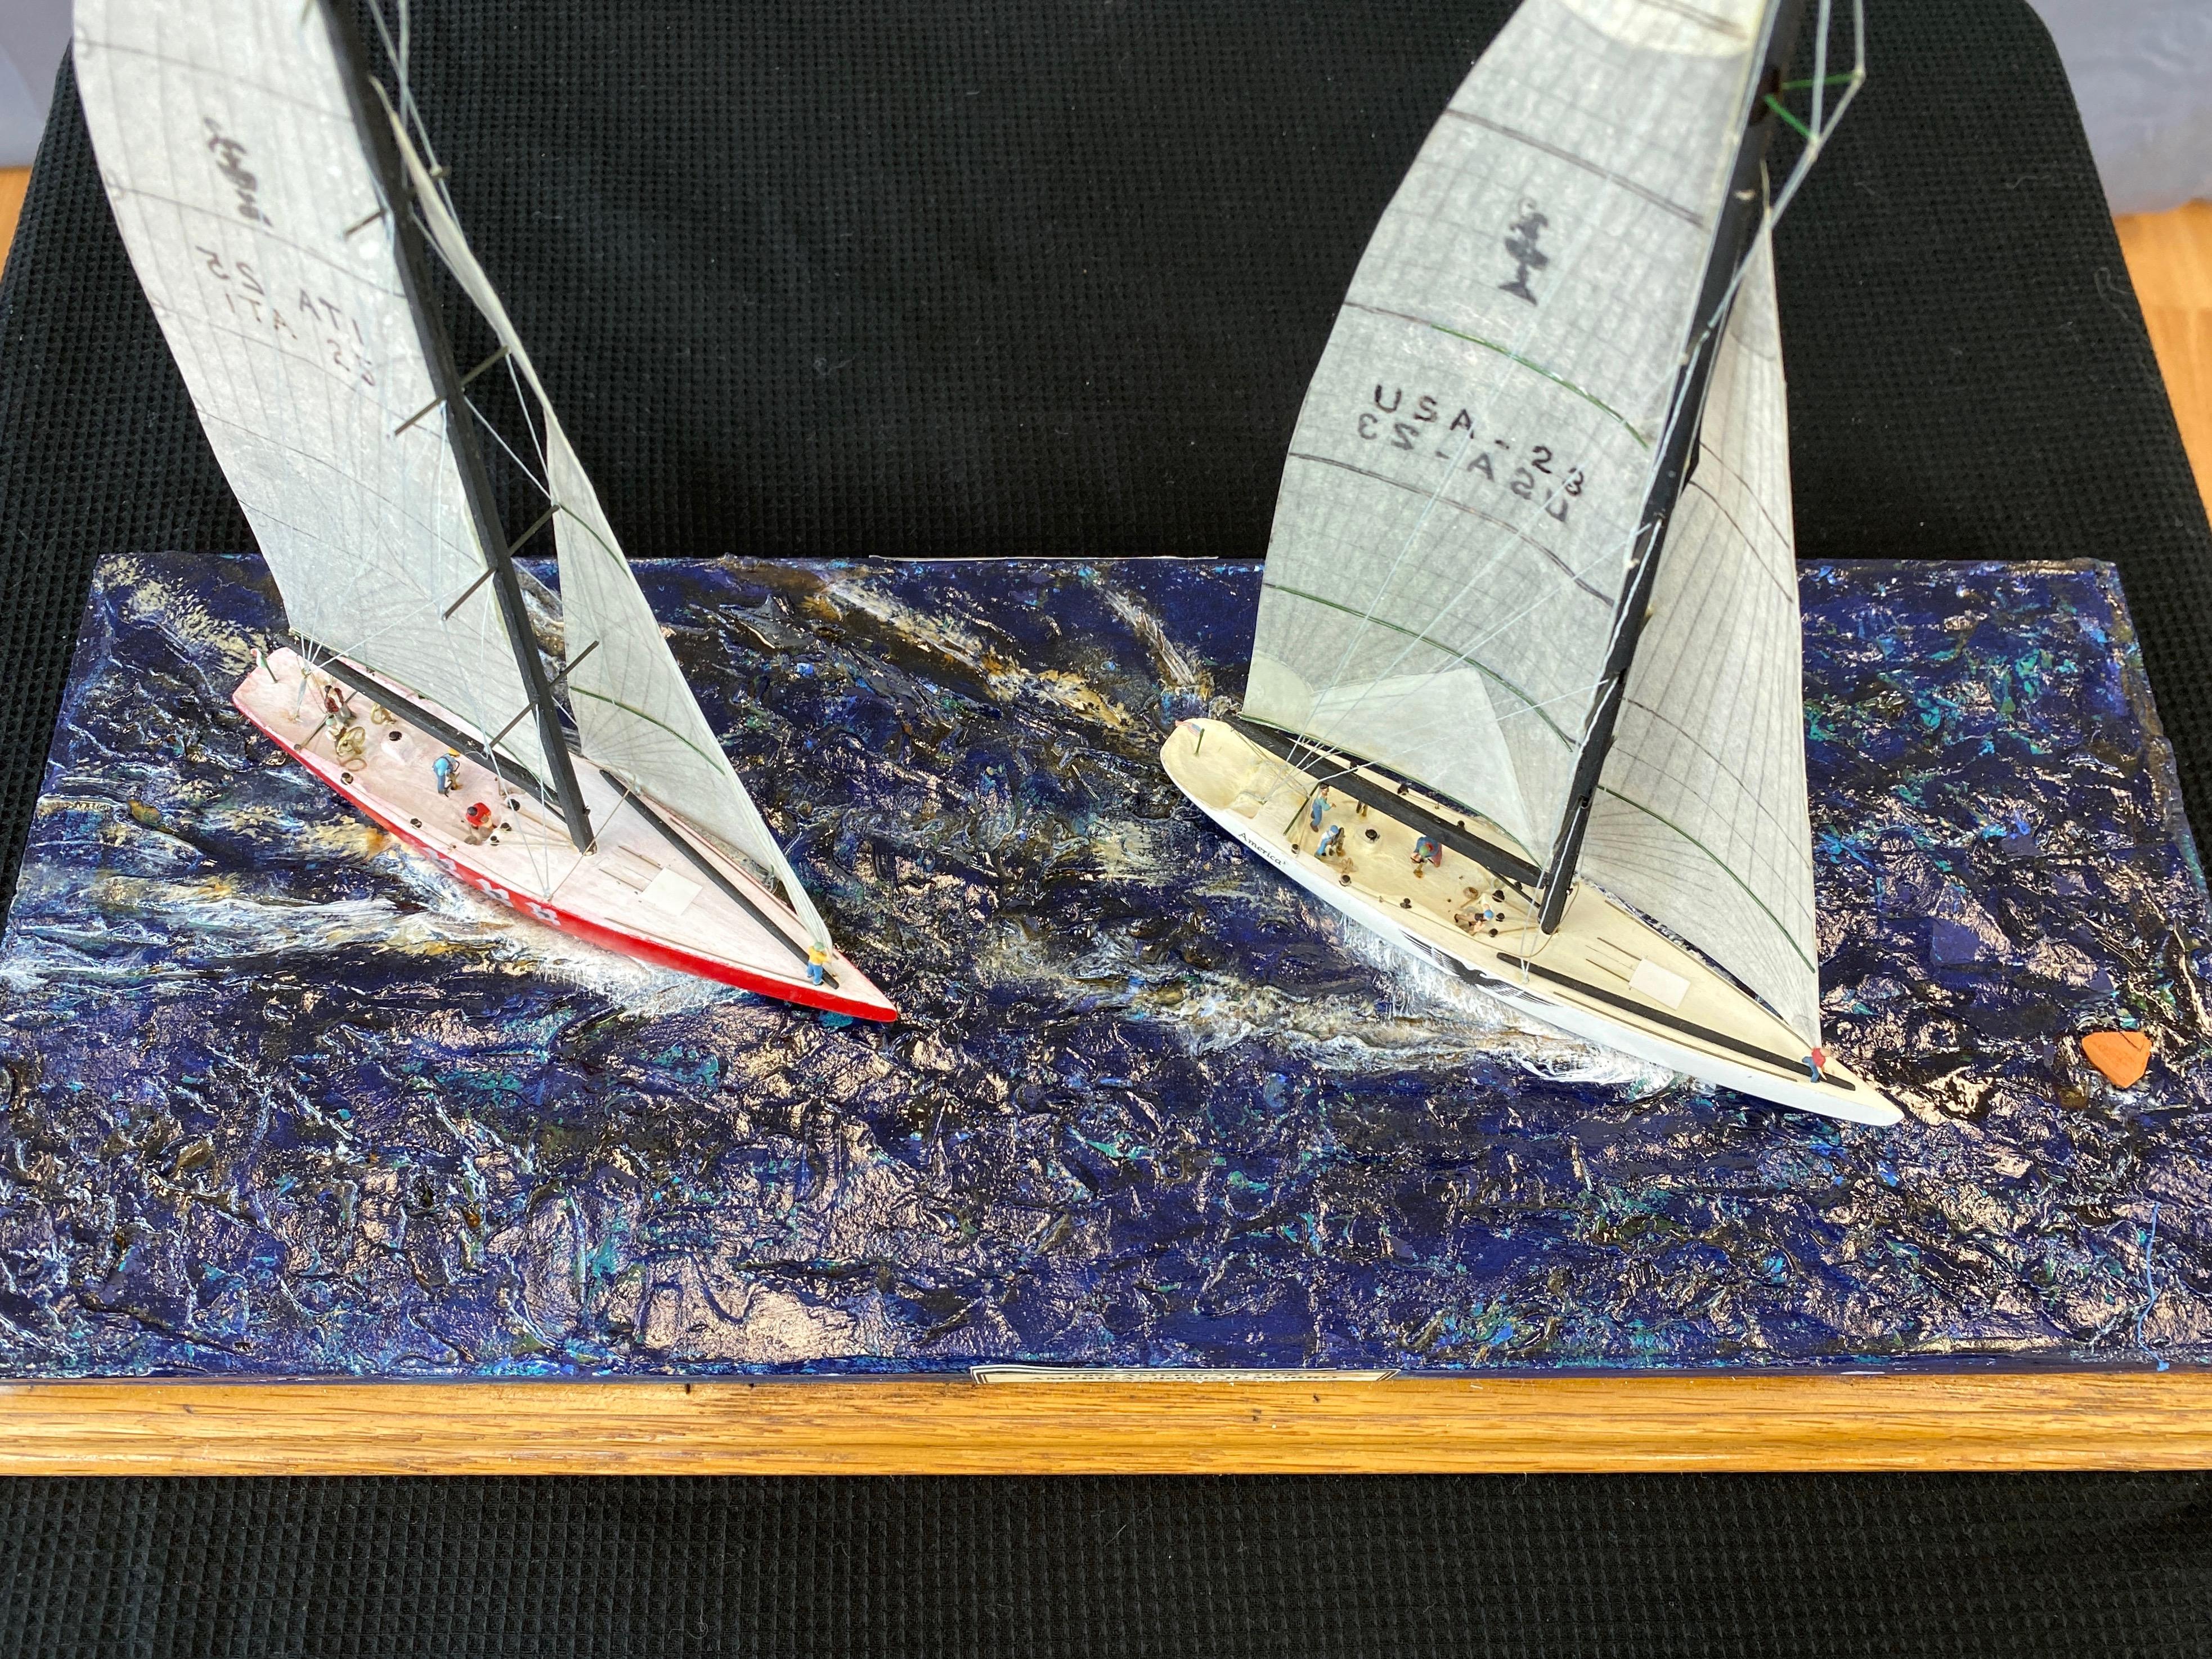 R. Royer 1992 28th America’s Cup Hand-Built Cased Diorama, 2009 1